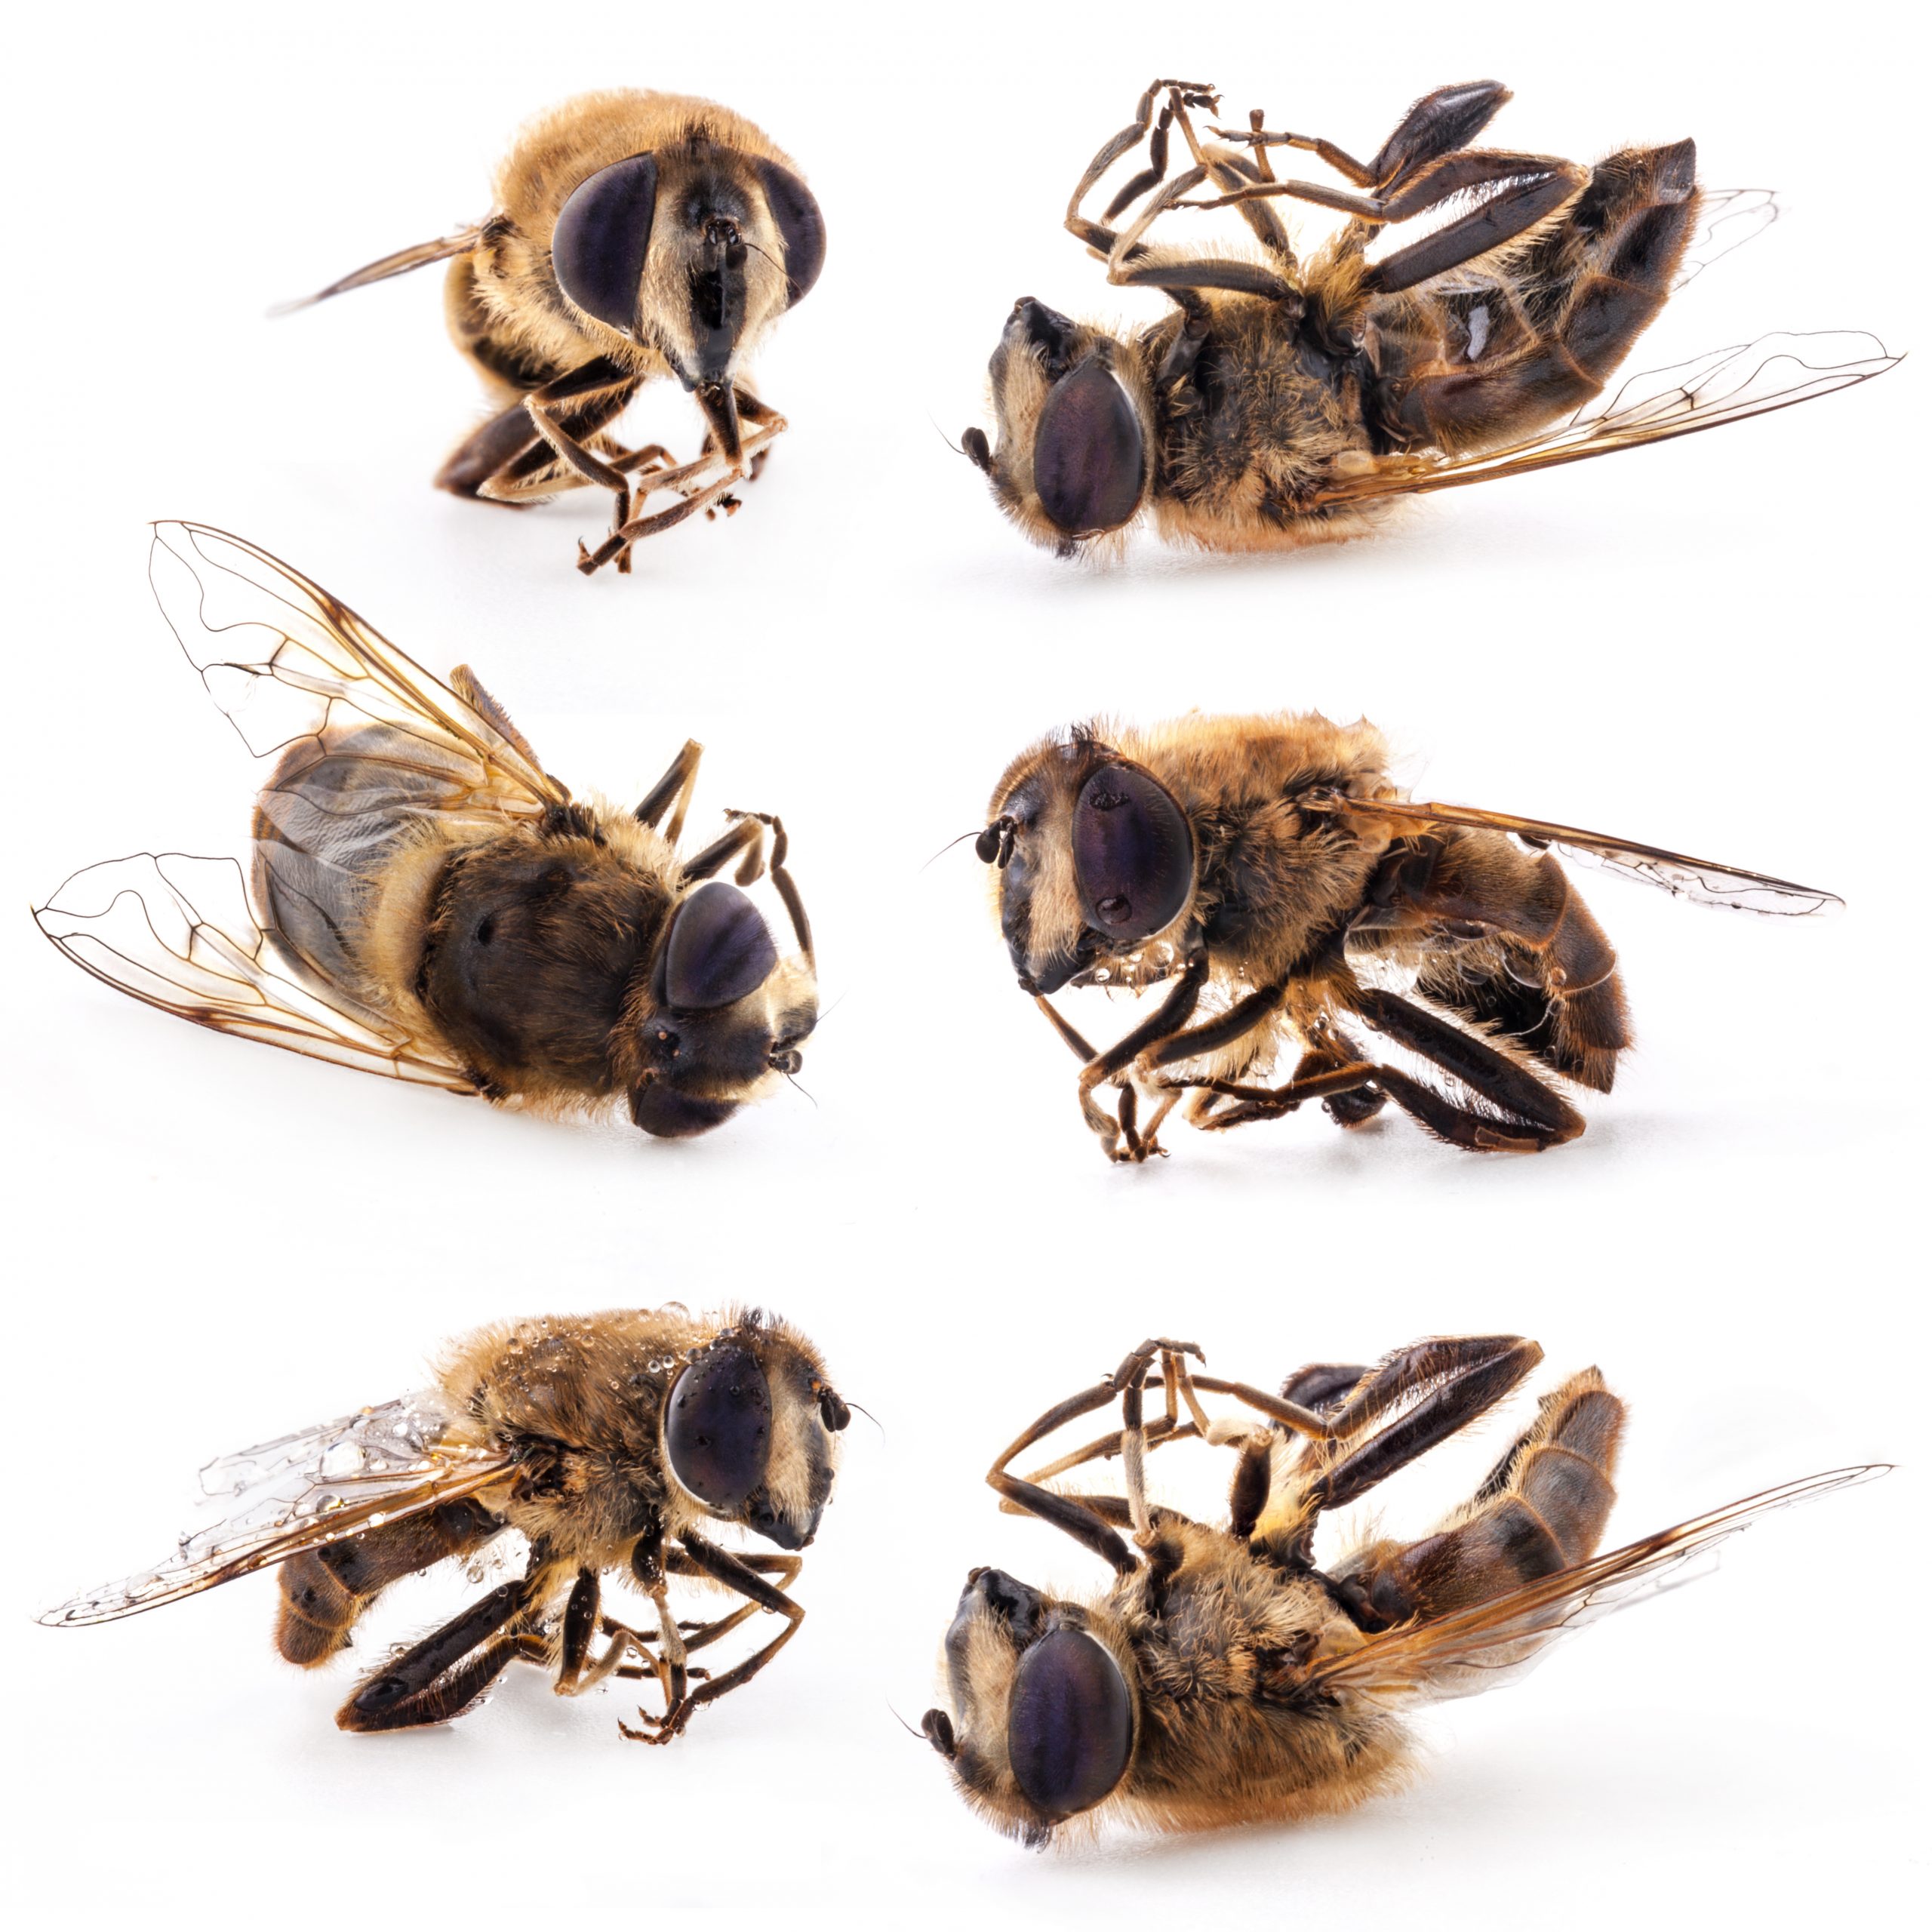 Insecticides Tied to Colony Collapse Disorder Under Investigation